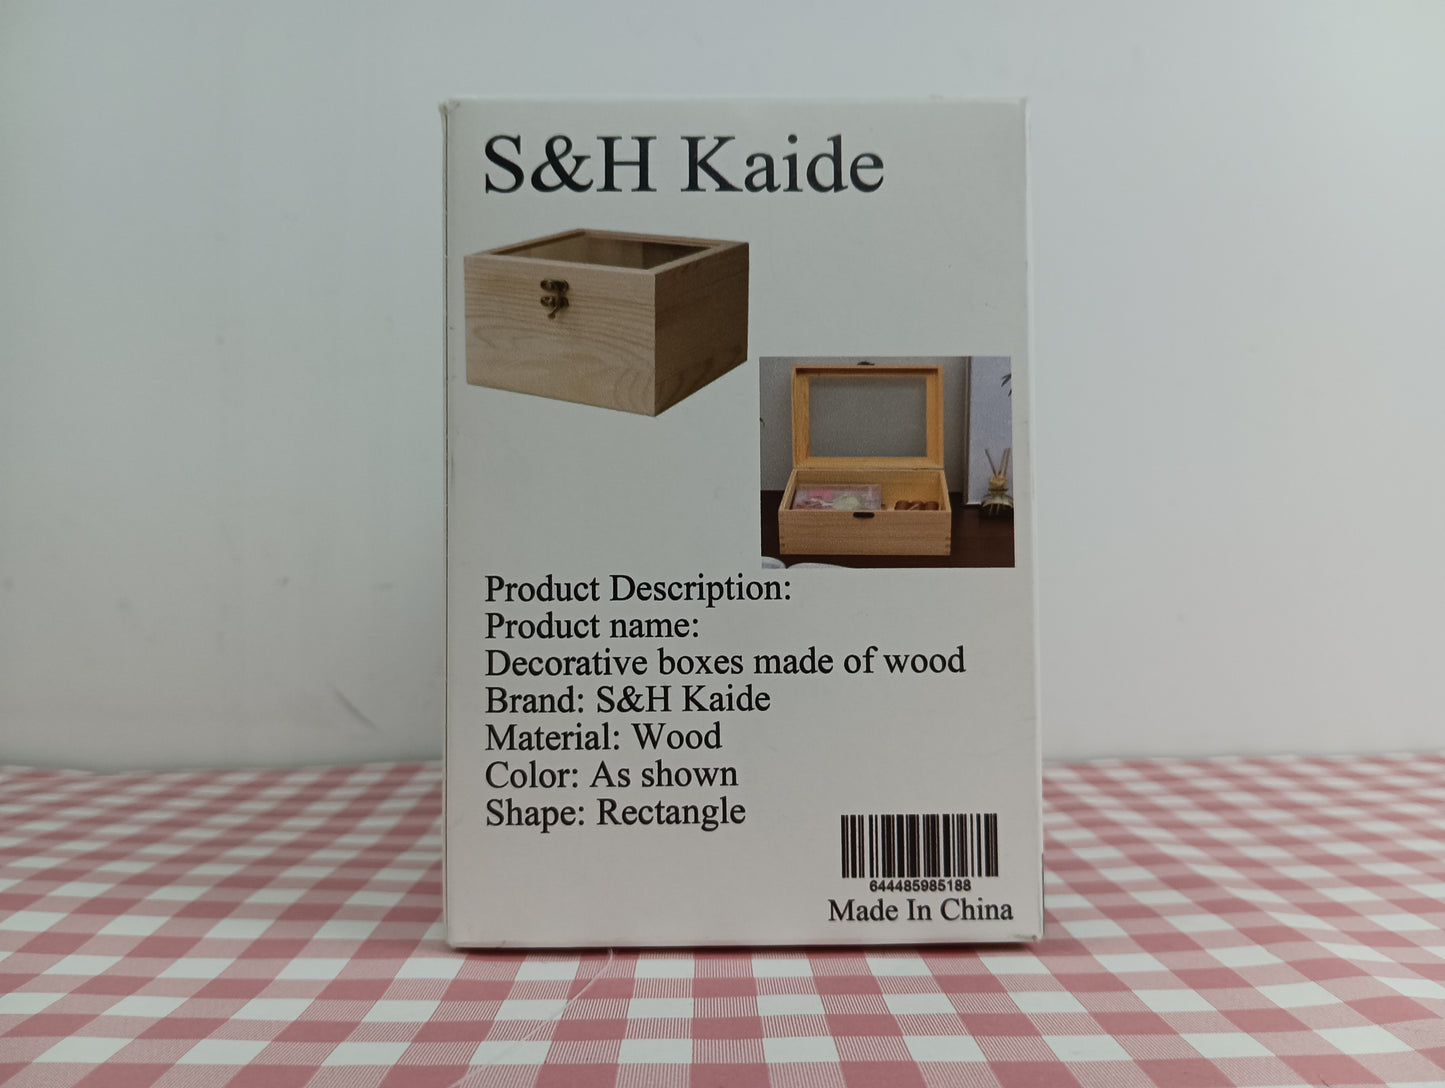 S&H Kaide Decorative boxes made of wood Transparent Glass Lid Small Wooden Box Super Small Mini Box with Lid Show Box Transparent Glass Lid Wooden Box Desktop Solid Wooden Box Accompanying Gift Packaging Box Jewelry Sundry Storage Boxes